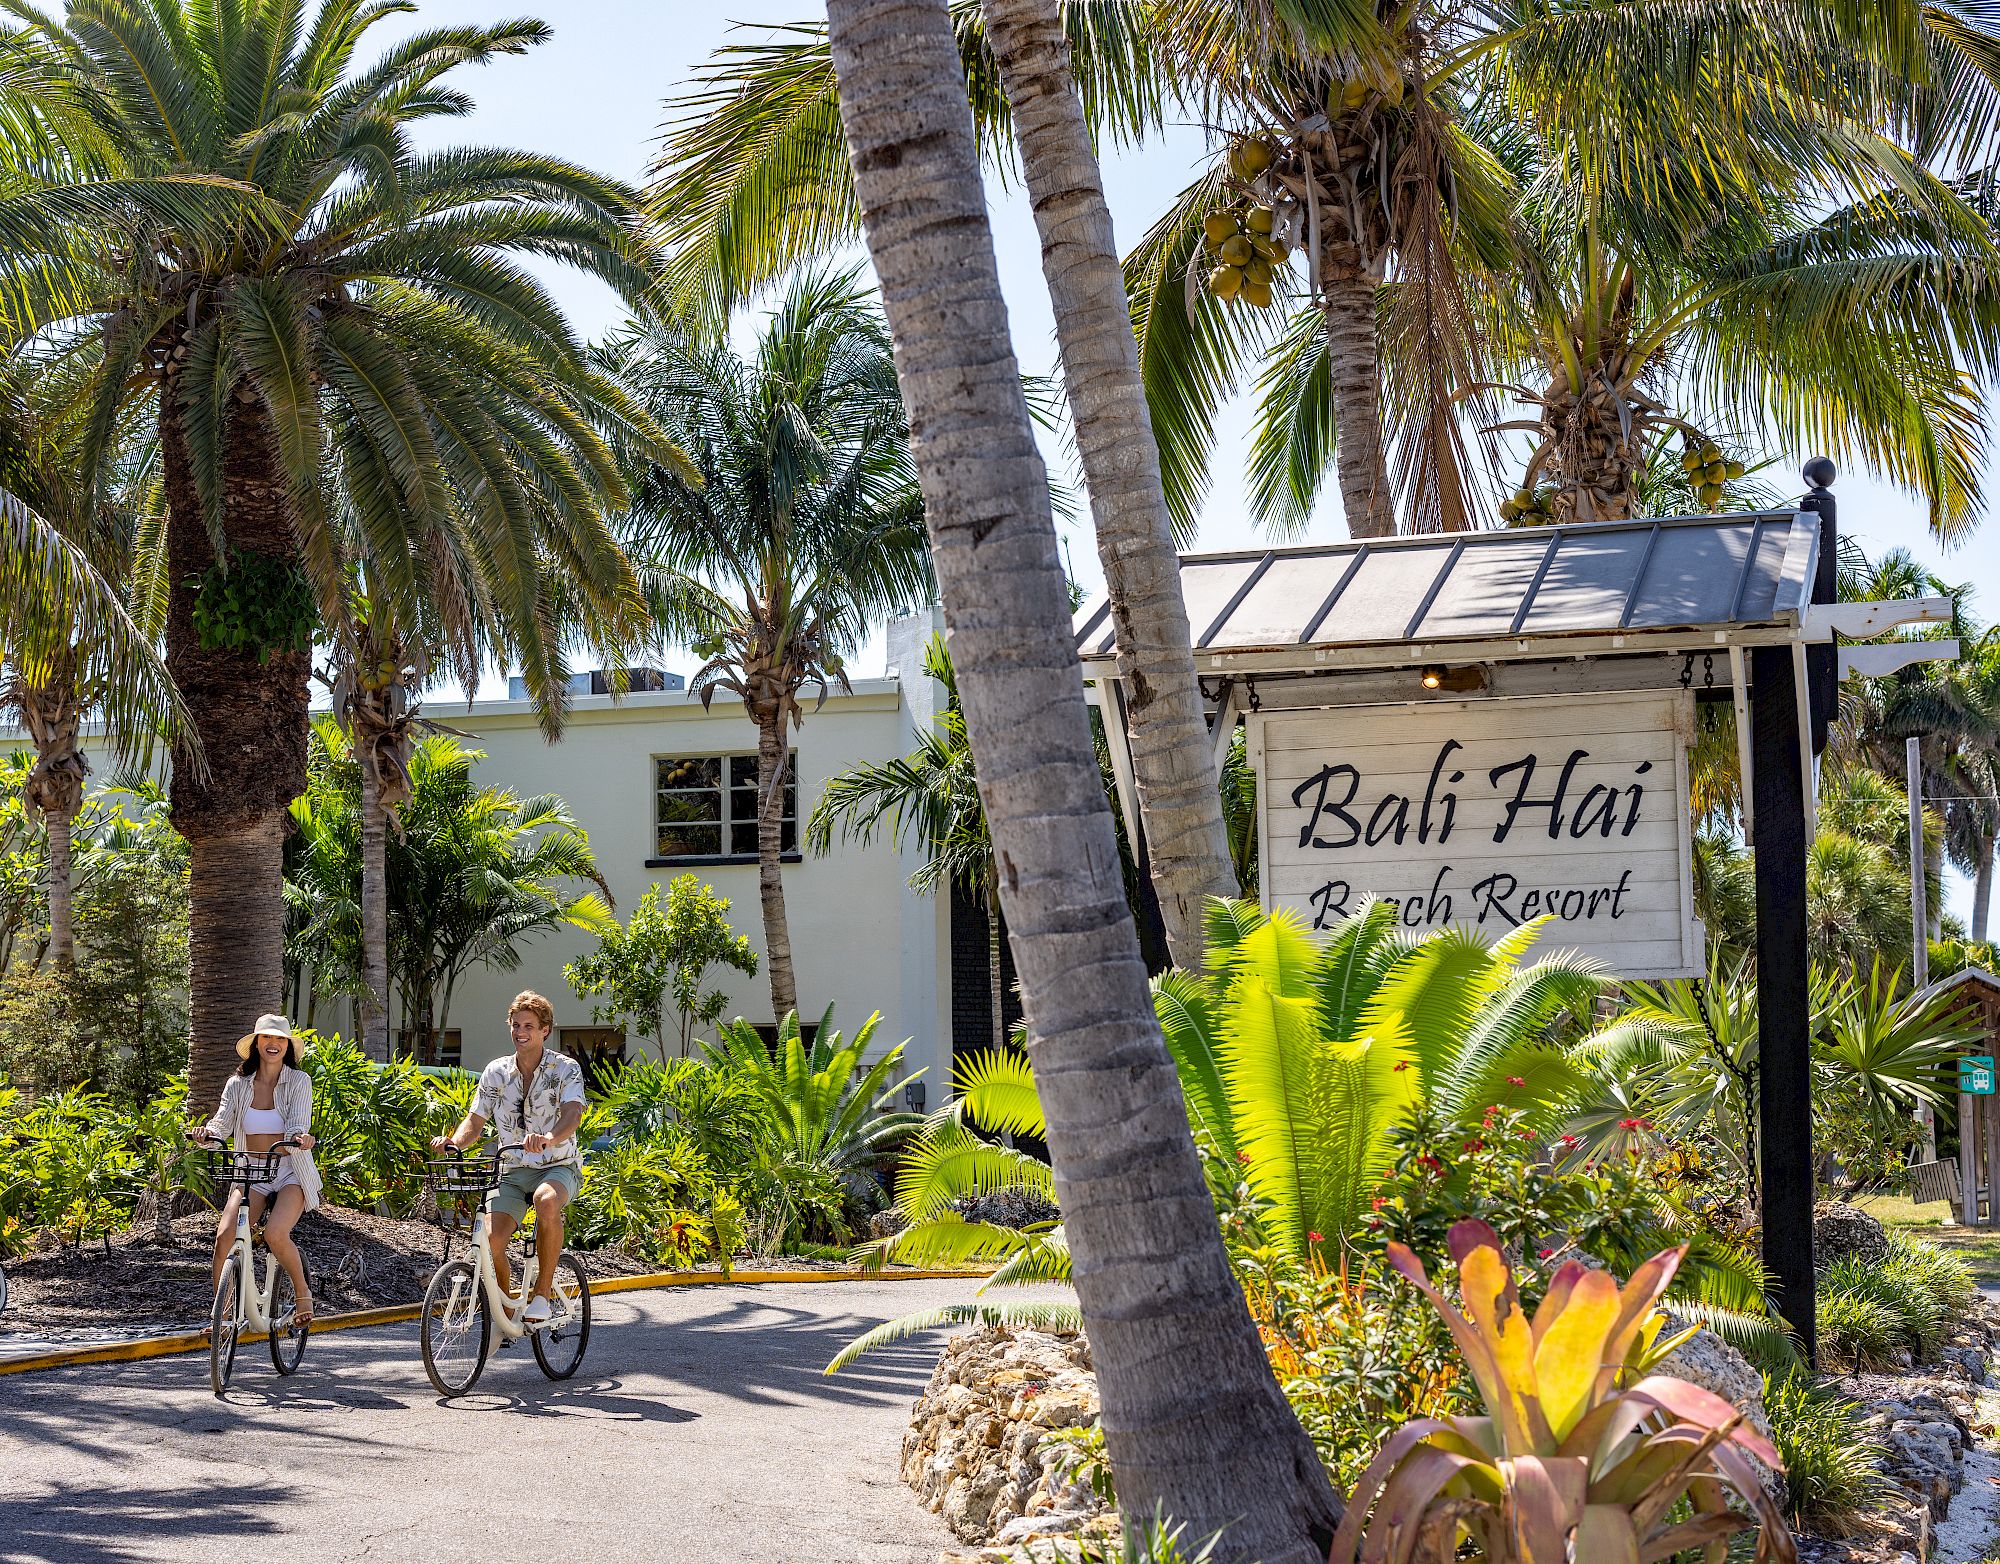 Two people ride bicycles near a tropical resort sign that reads 